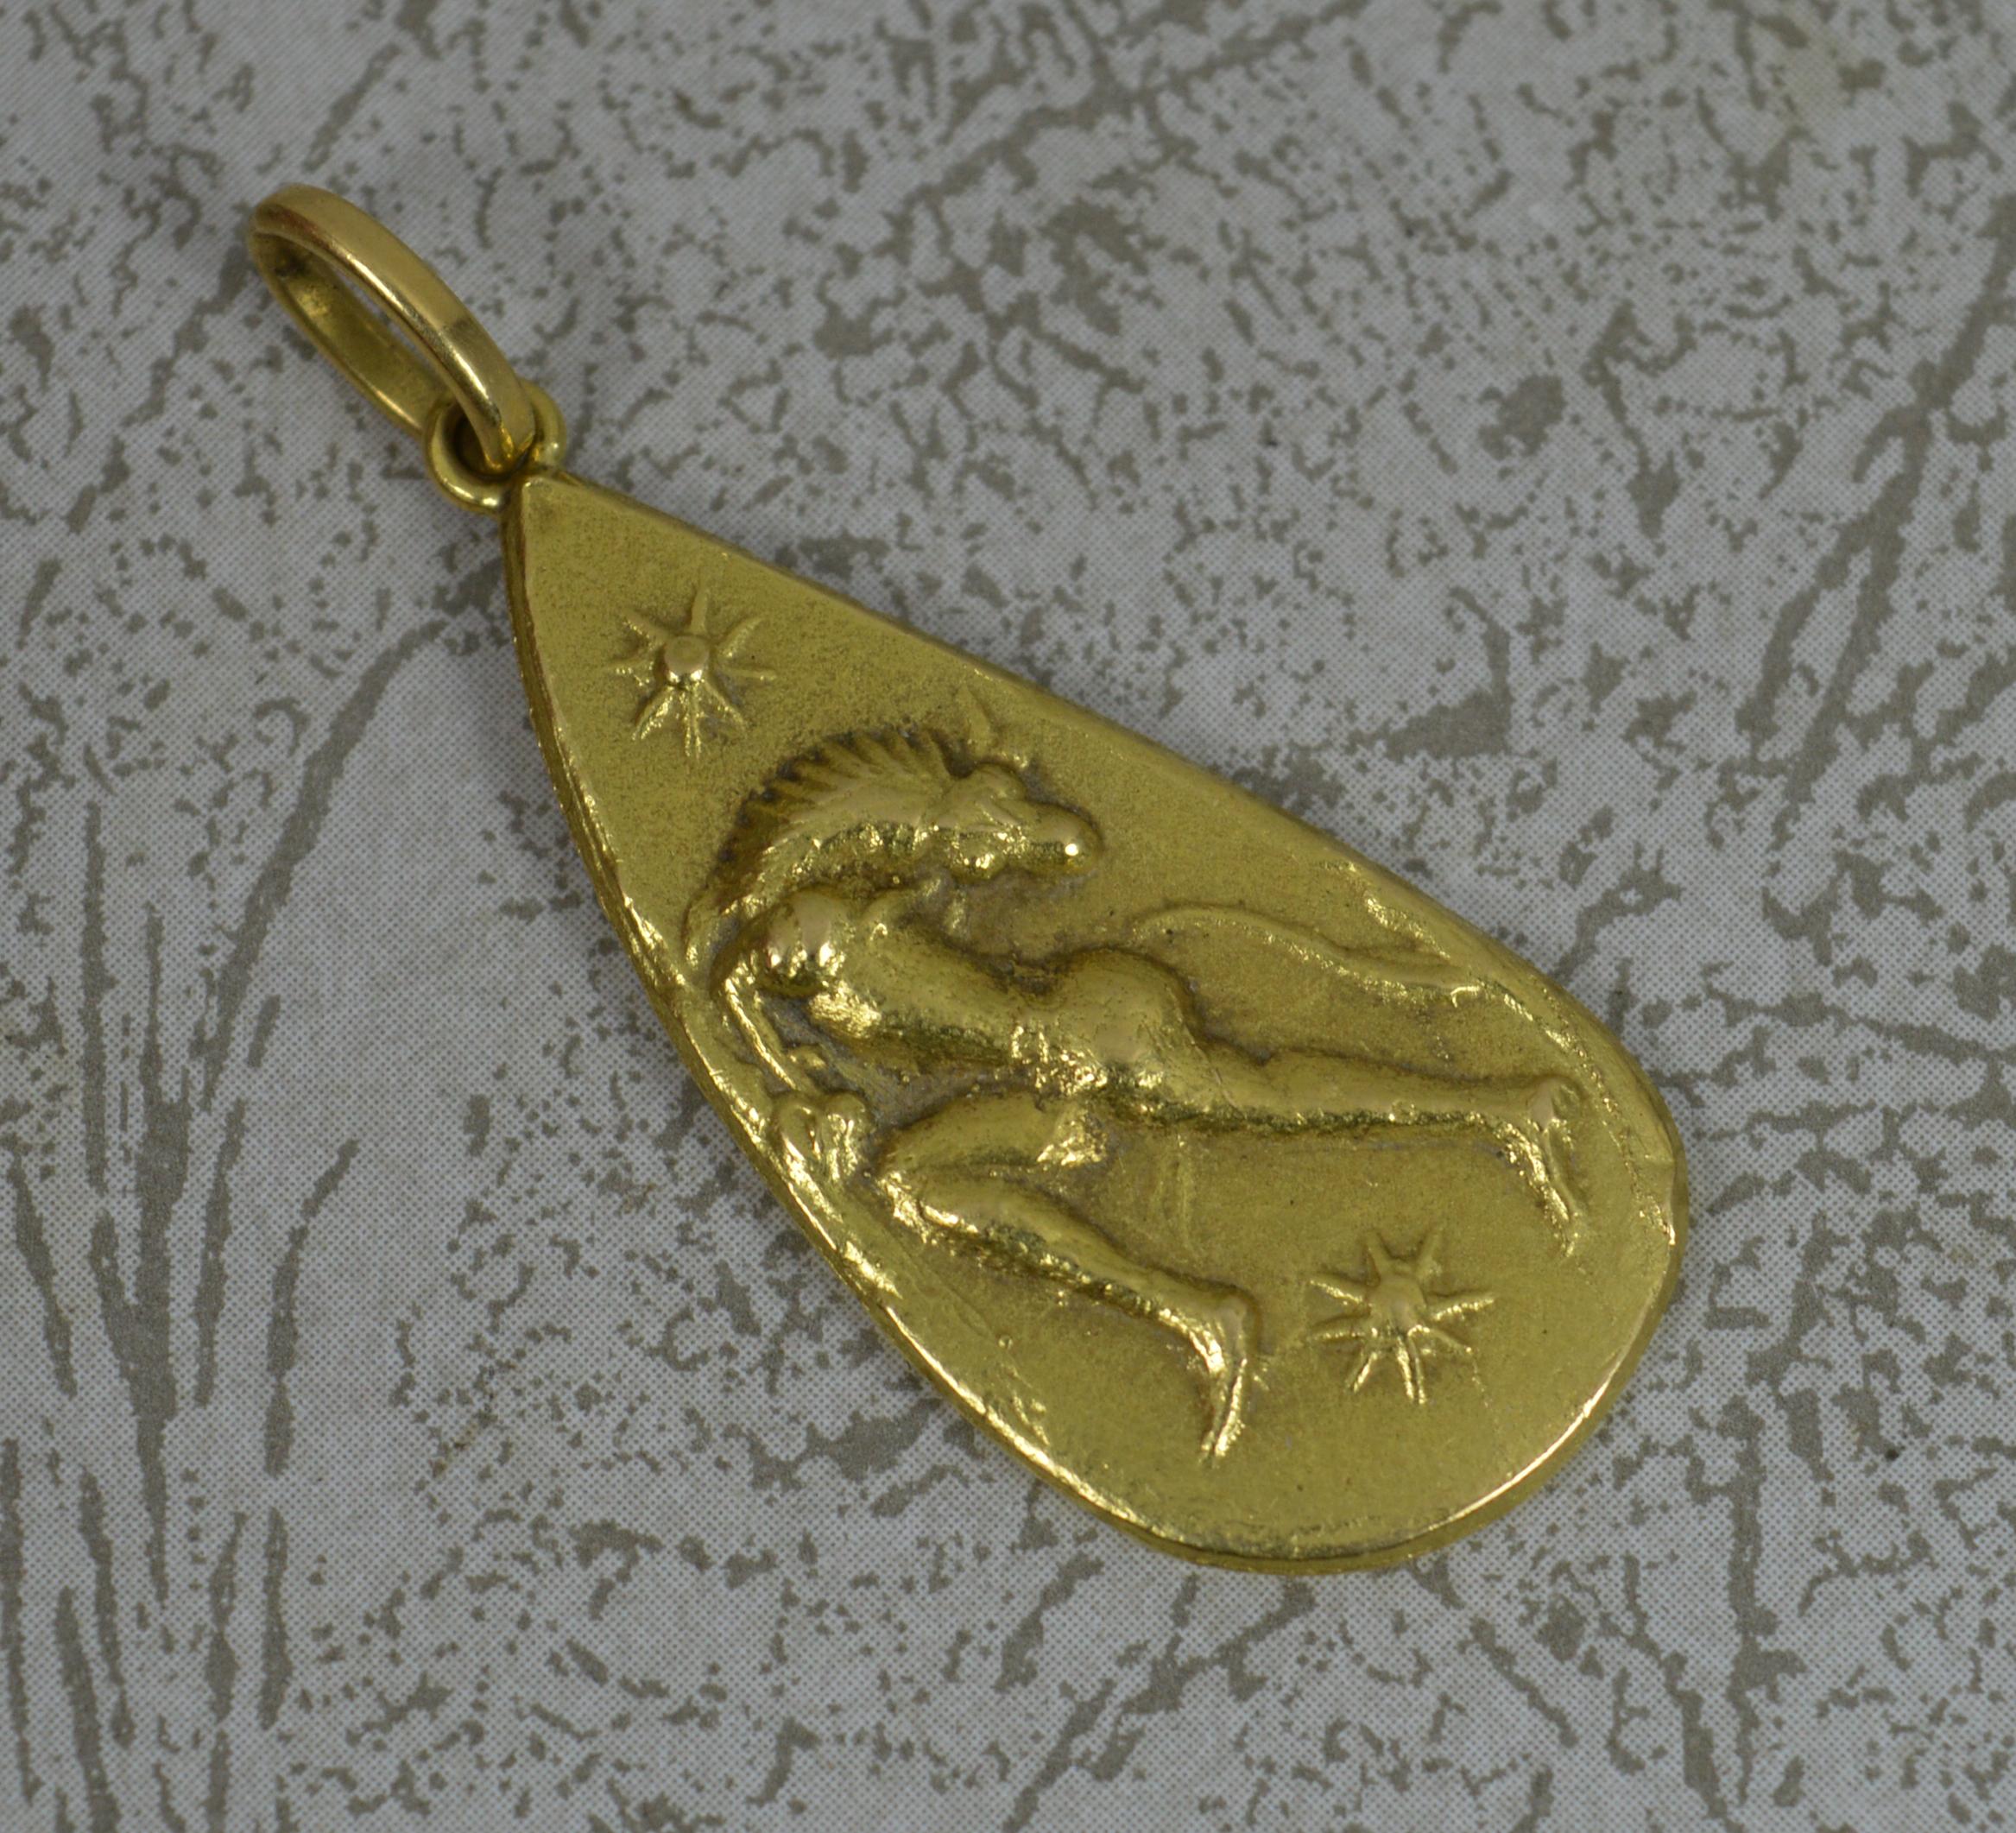 A superb vintage pendant.
Solid 14 carat yellow gold example.
A pear shaped drop example with a mythical creature to centre with a star above or below.

CONDITION ; Excellent for age. Crisp design. Issue free. Please view photographs.
WEIGHT ; 5.6